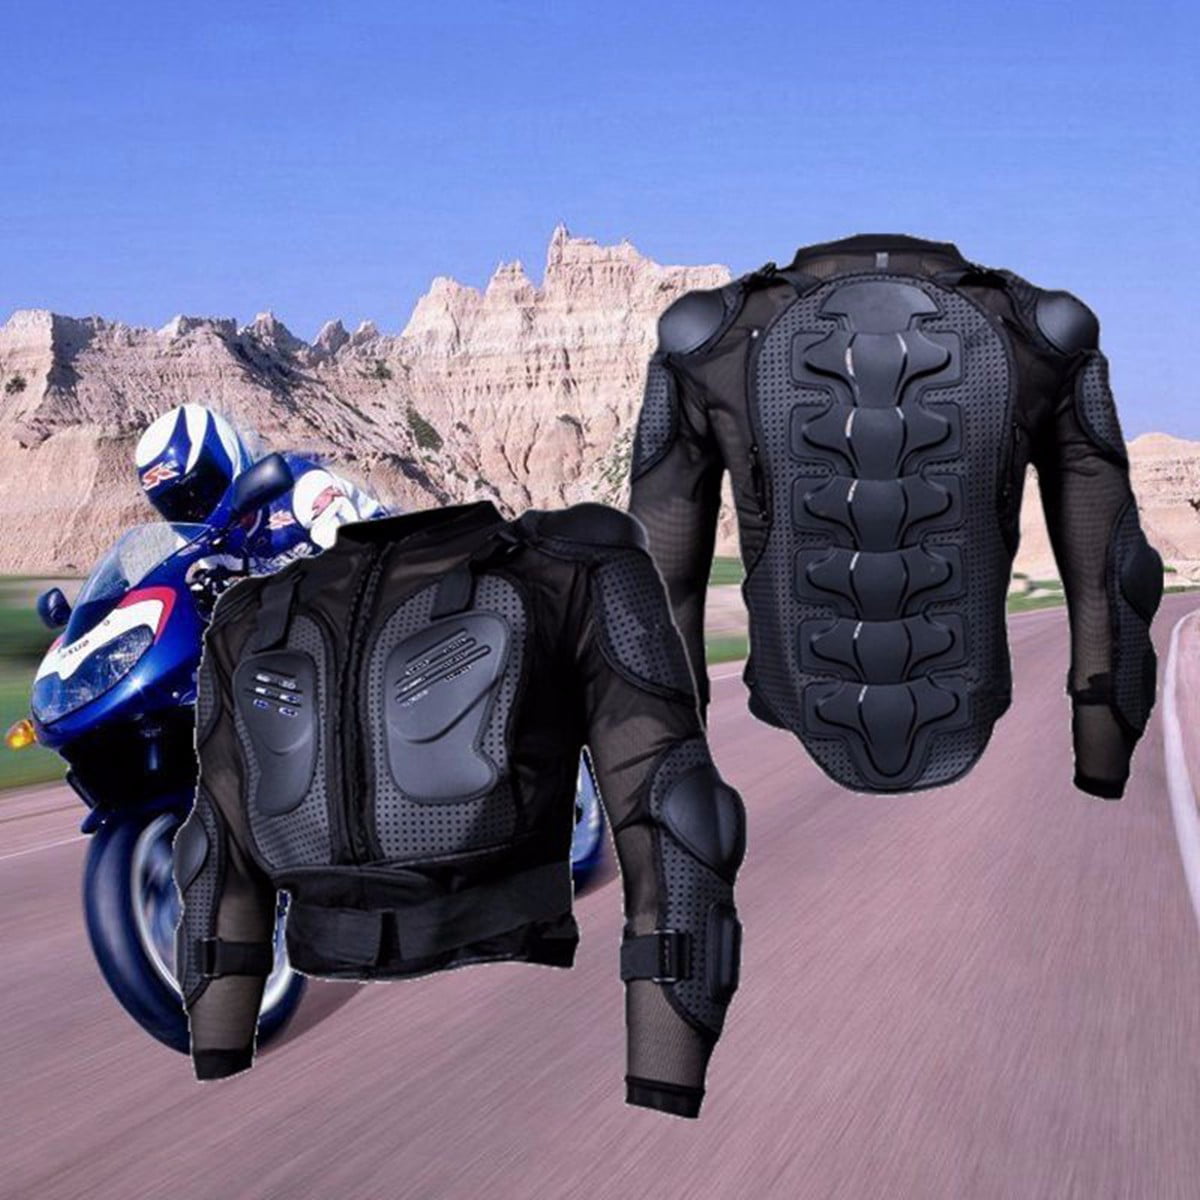 Motorcycle Armored Jacket - Motorcycle Full Body Armor Jacket Protector